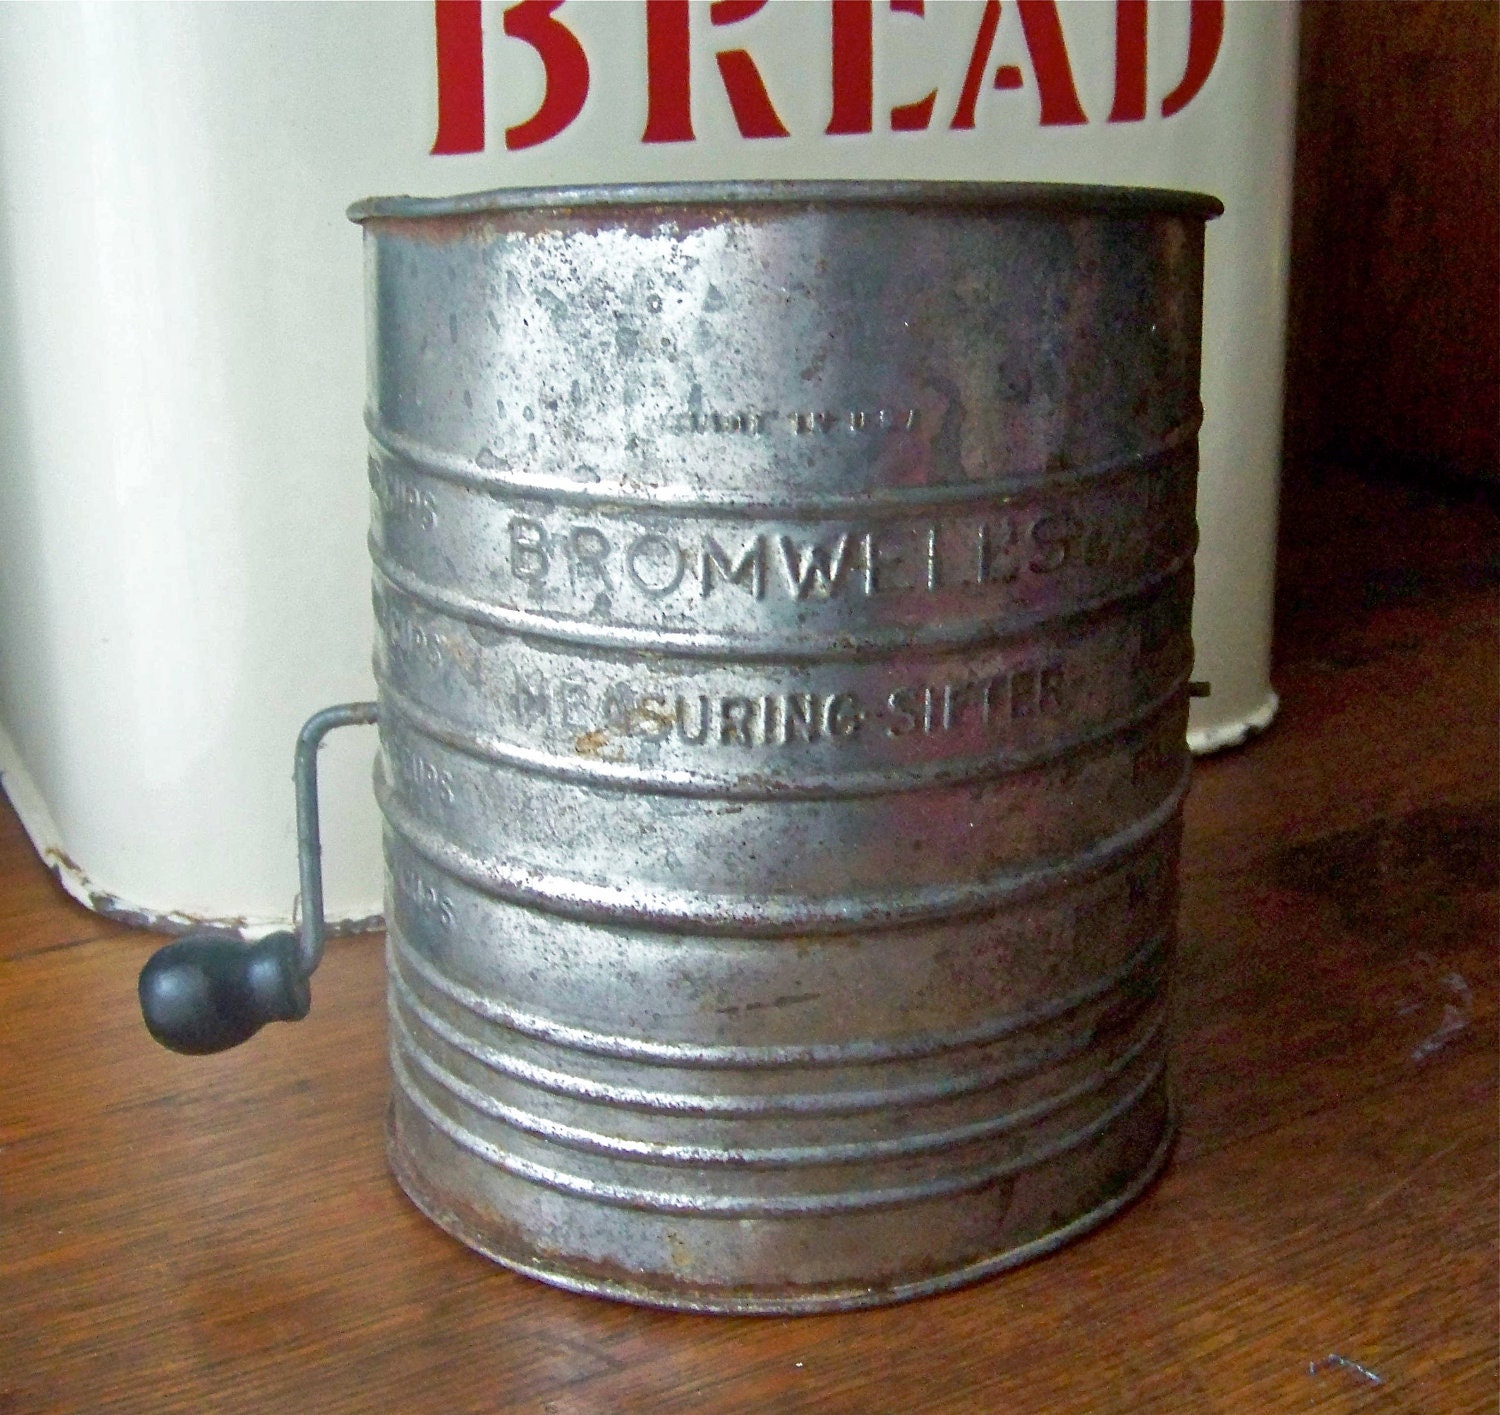 Vintage Bromwell's Flour Sifter Retro Kitchen by CynthiasAttic